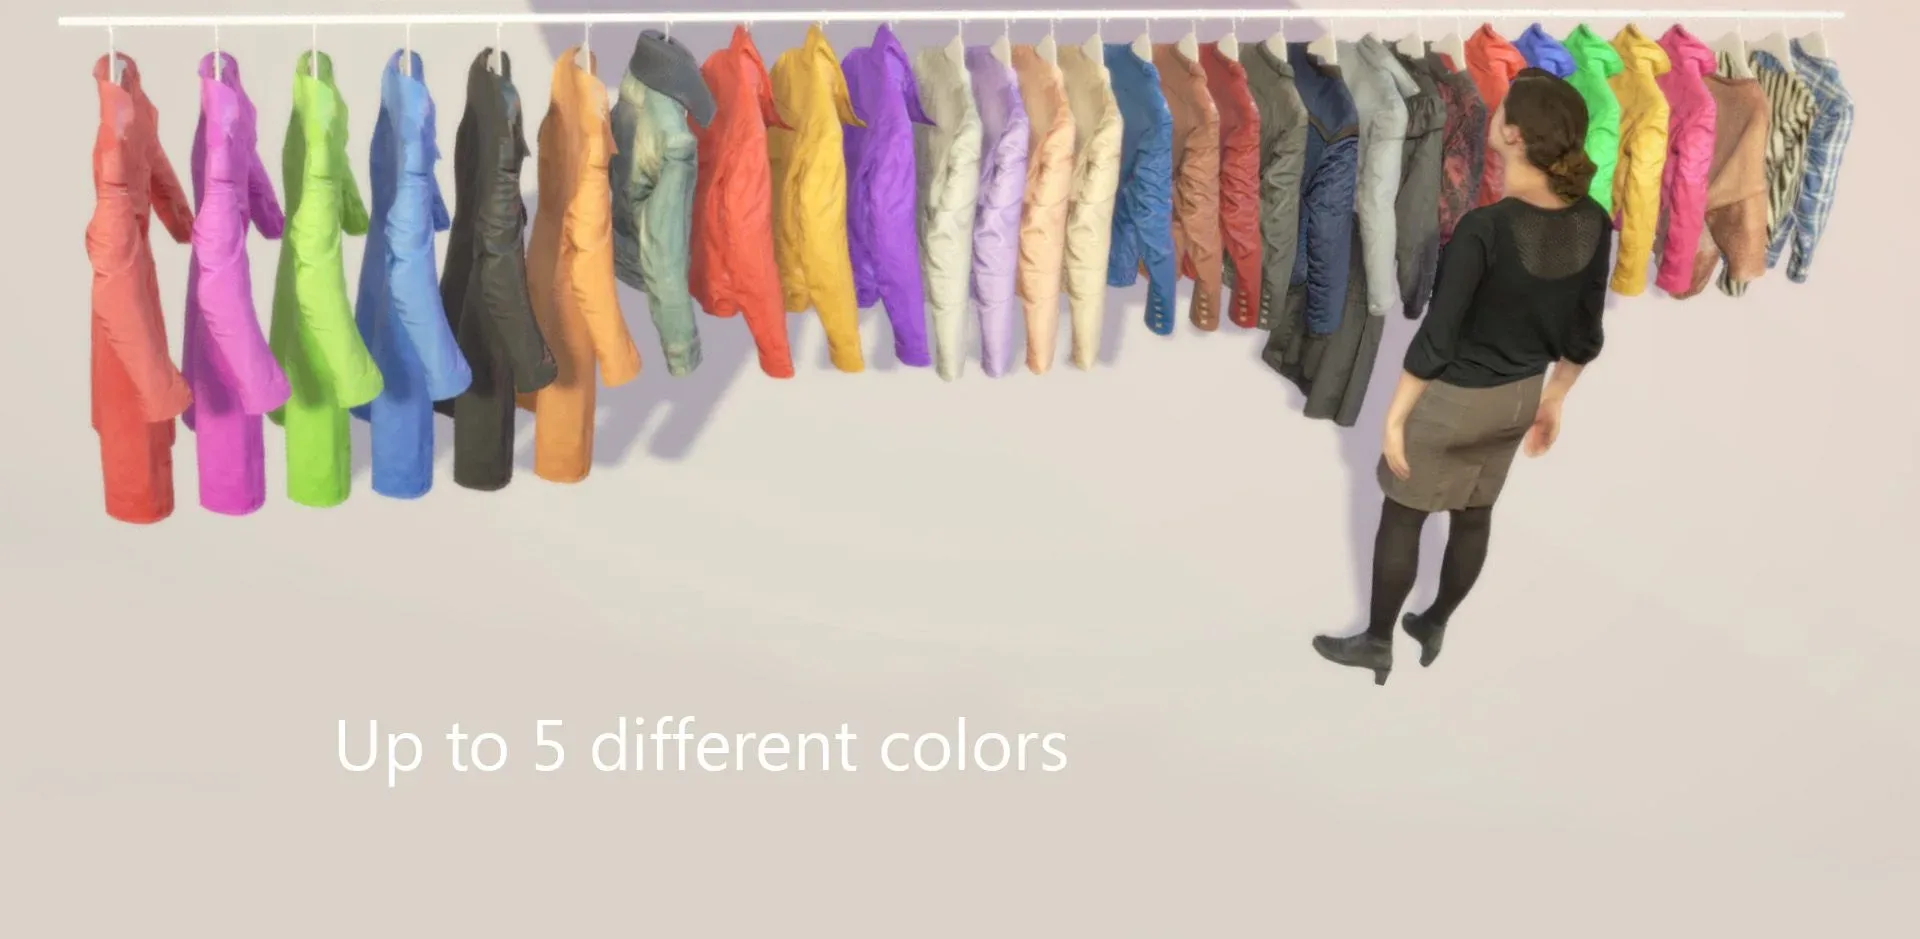 3D Scanned Clothing Collection on Hangers